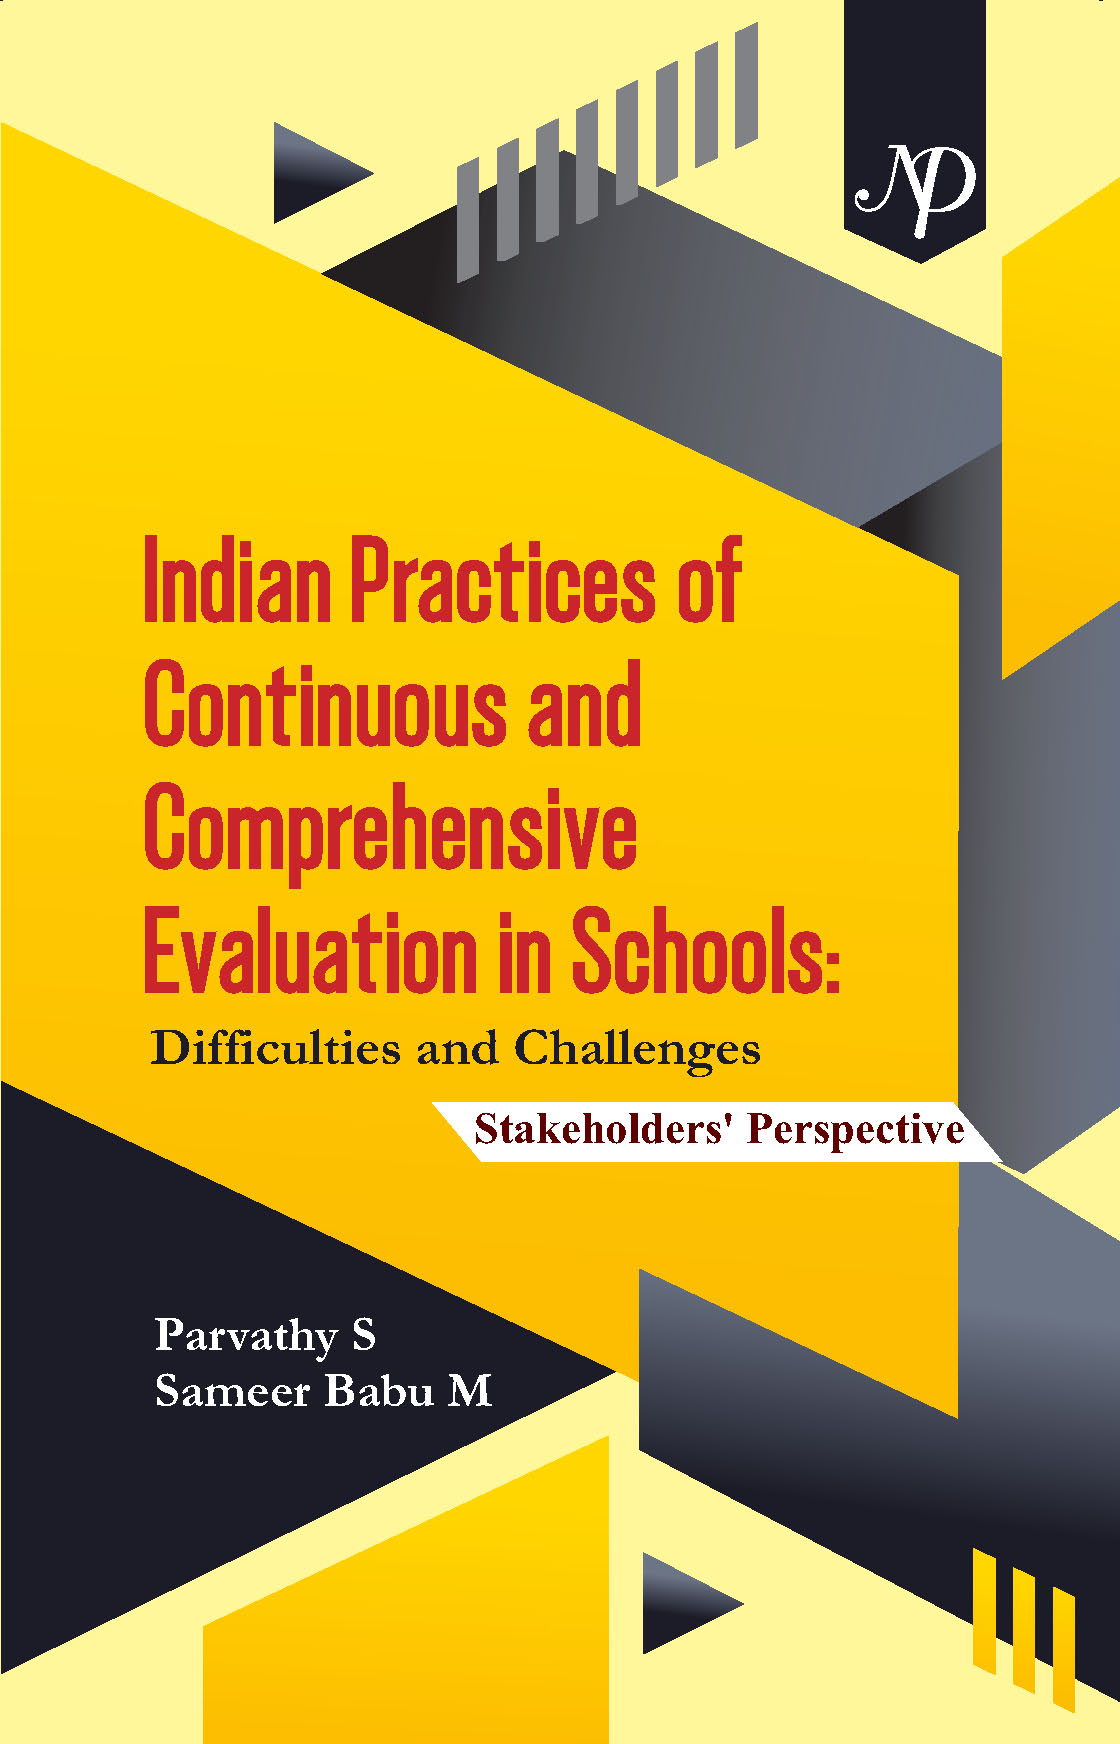 Indian Practice of Contineous and Comprehensive Cover.jpg